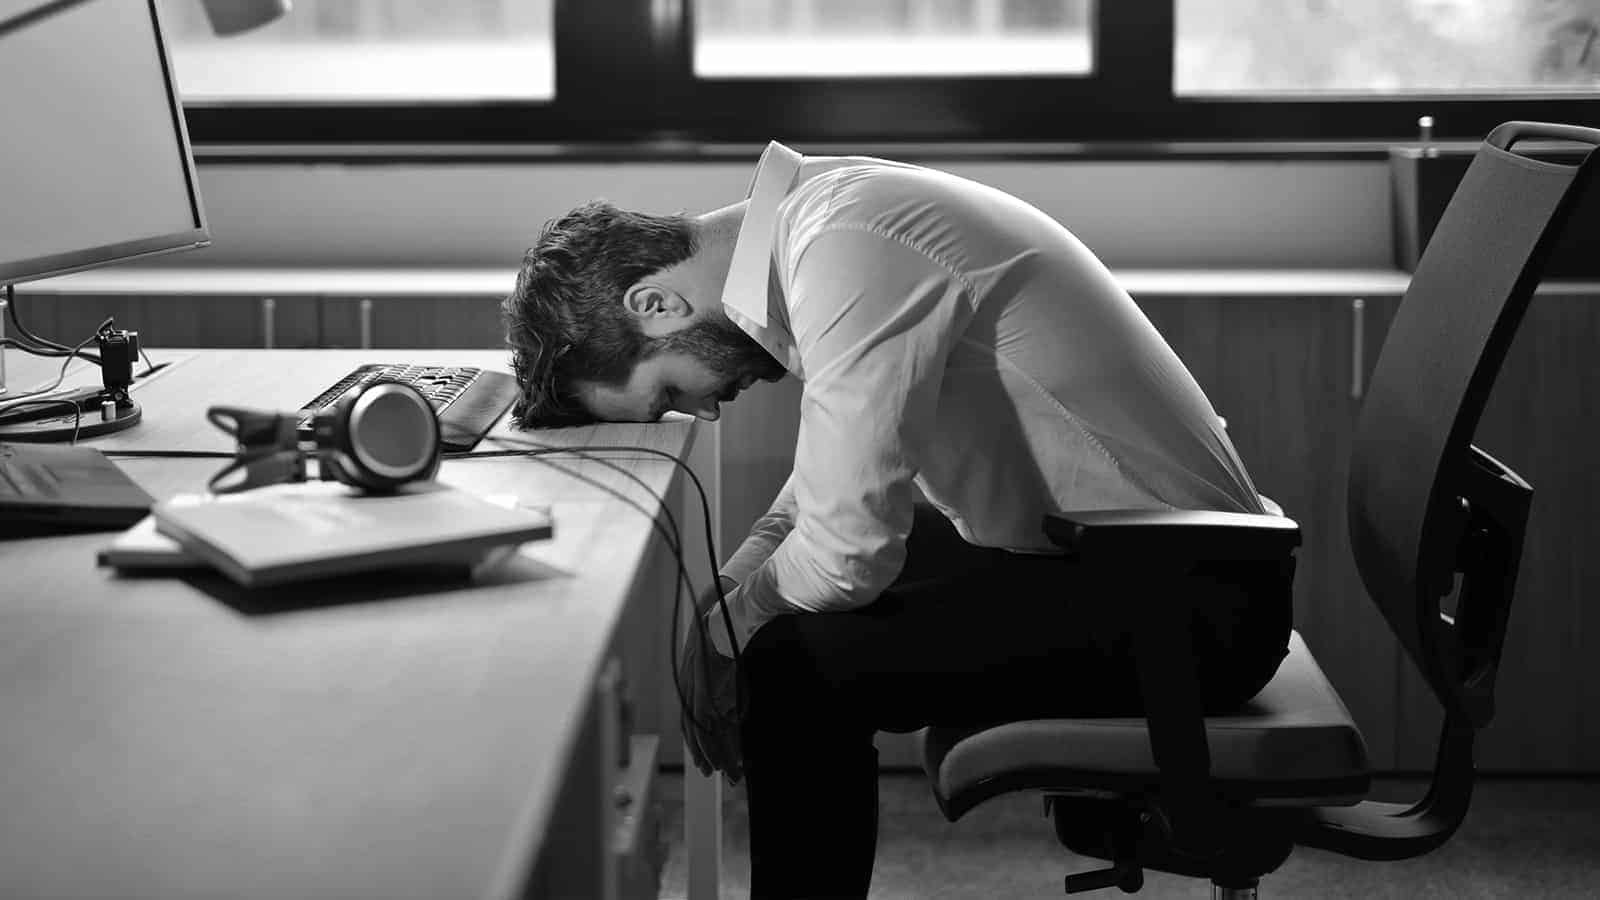 15 Signs Someone Struggles with Work Fatigue